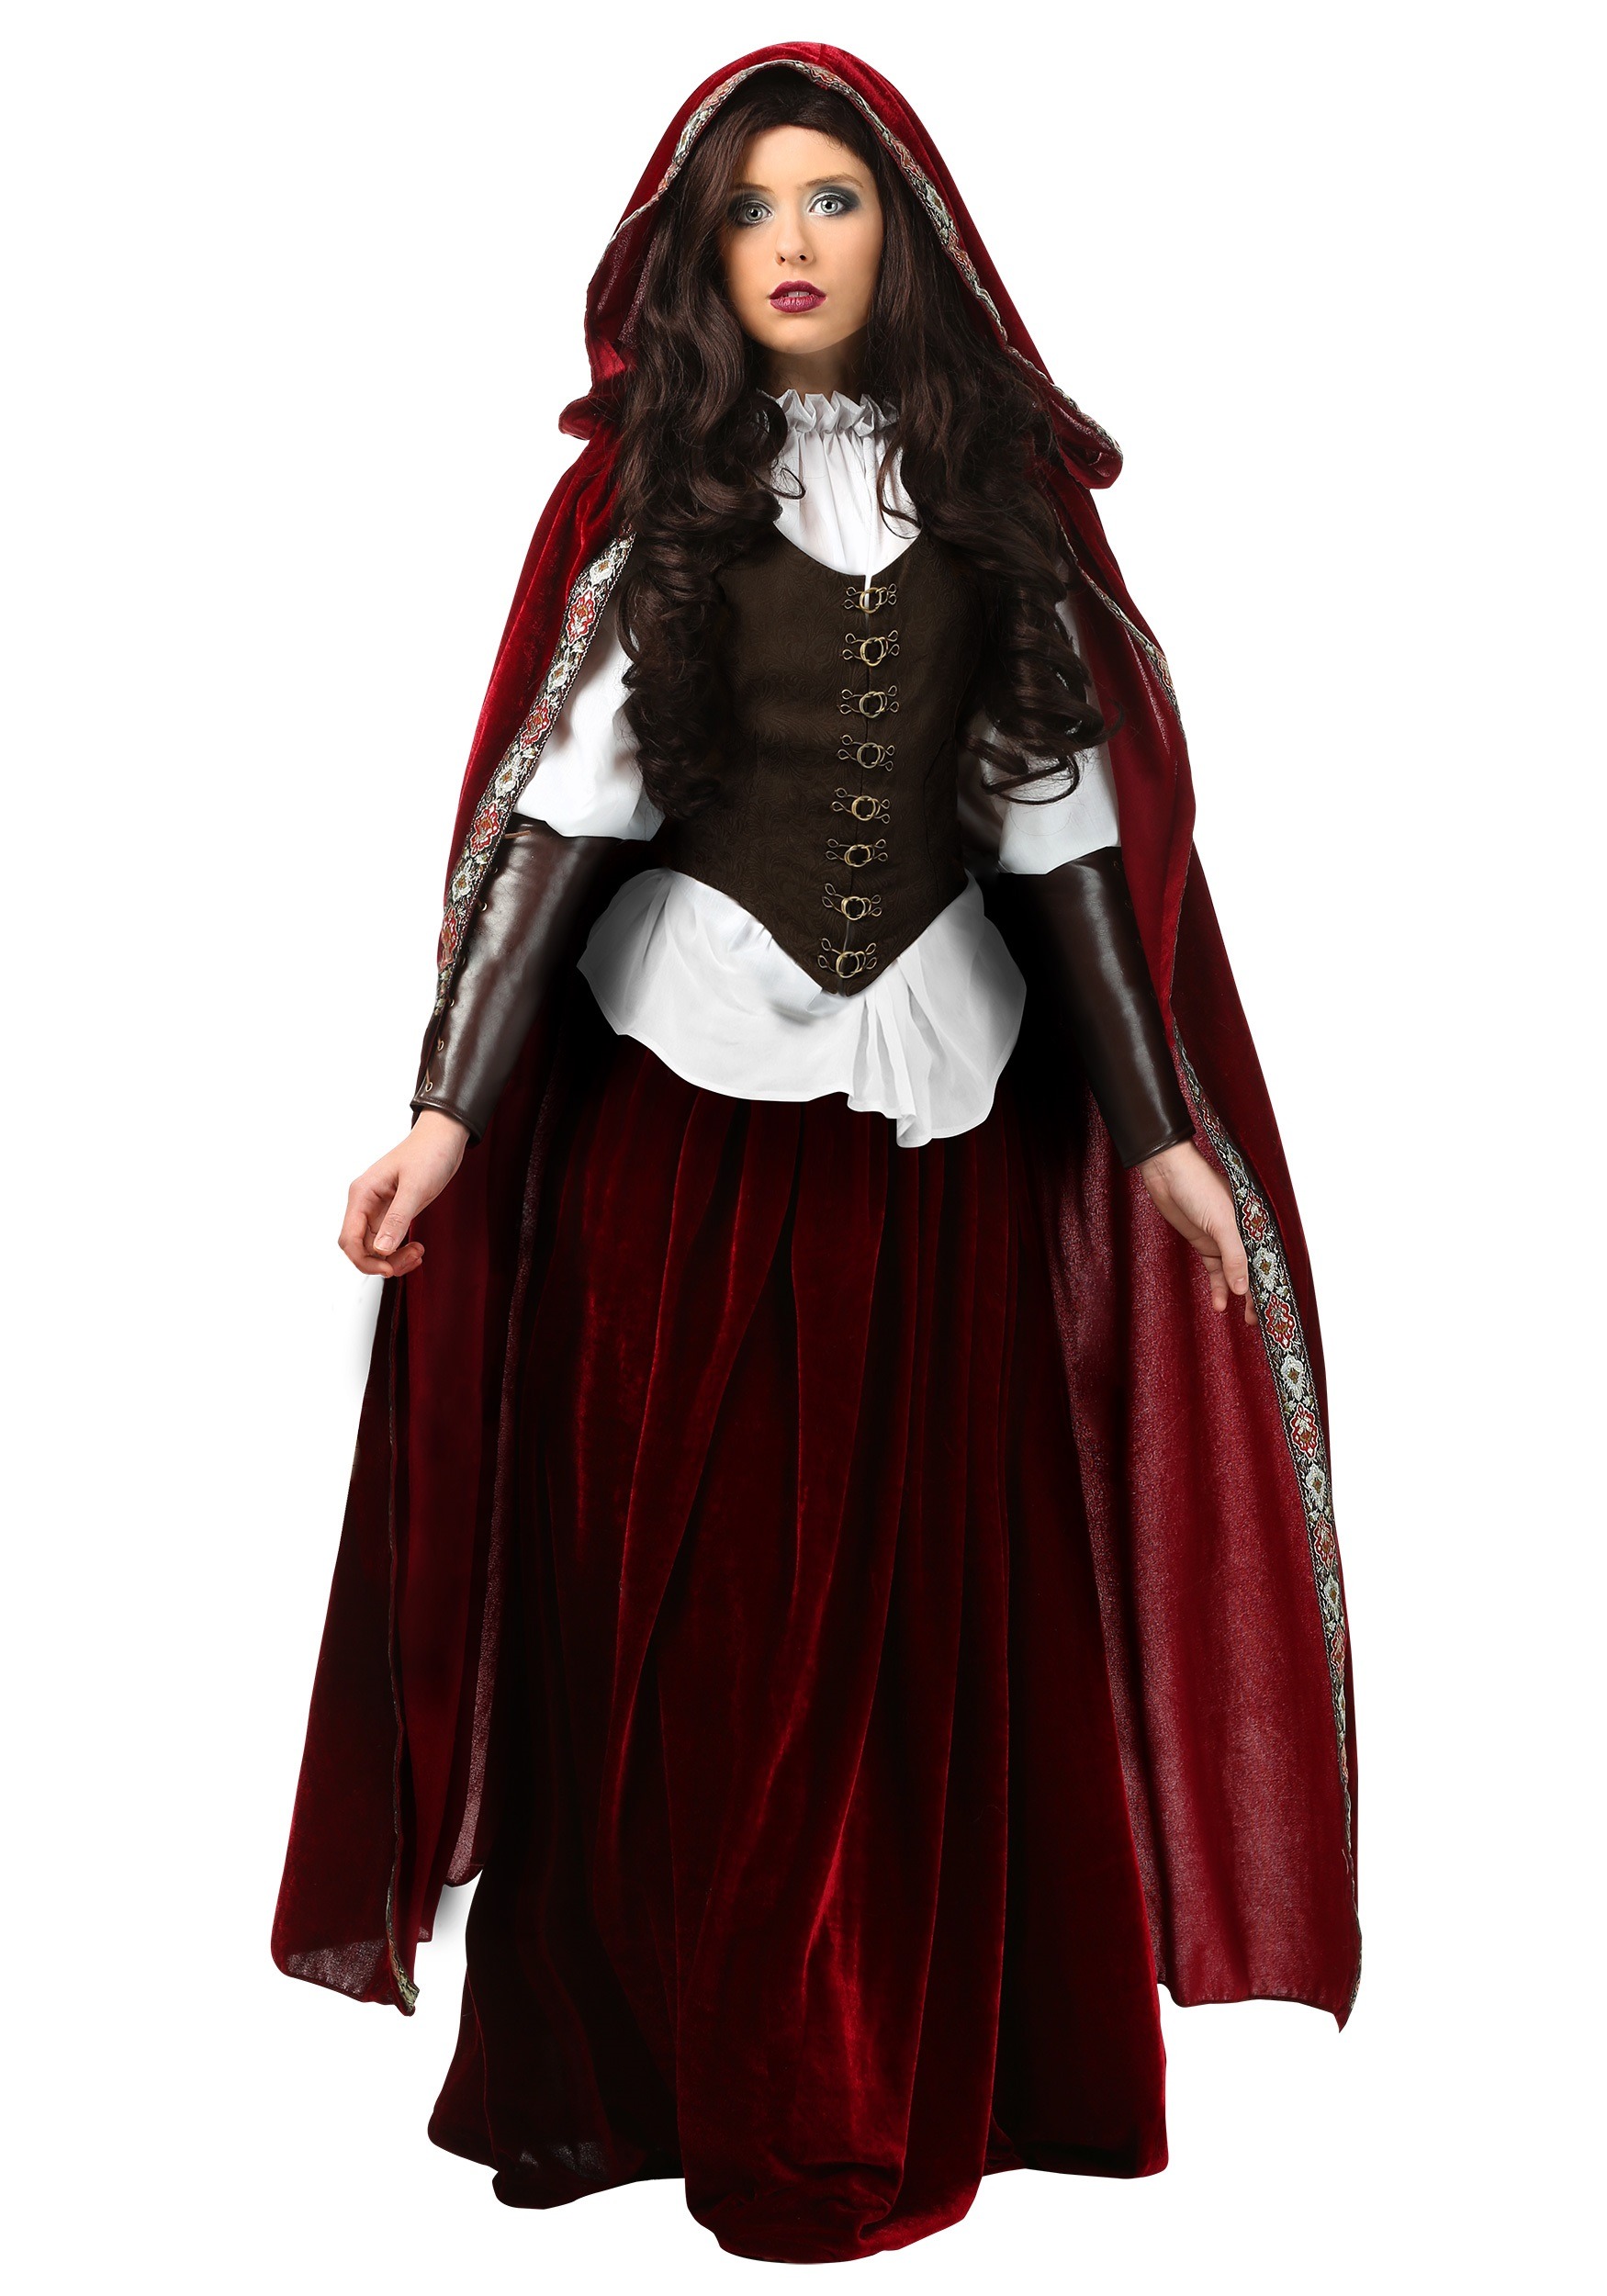 Photos - Fancy Dress Deluxe FUN Costumes  Red Riding Hood Plus Size  Costume for Wome 